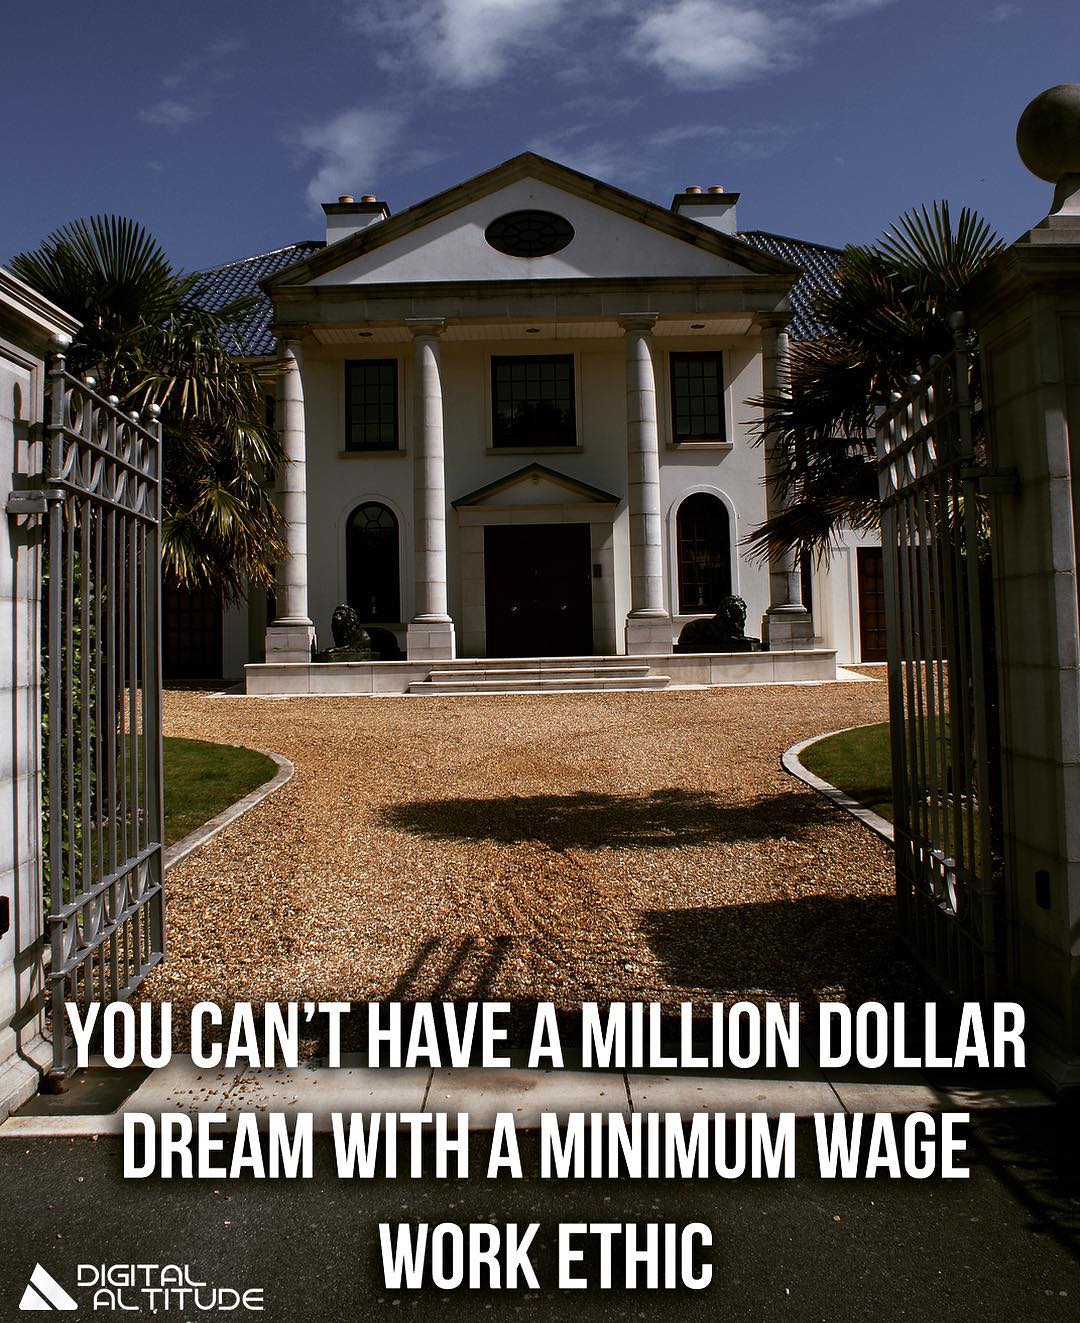 You can't have a million dollar dream with a minimum wage work ethic.